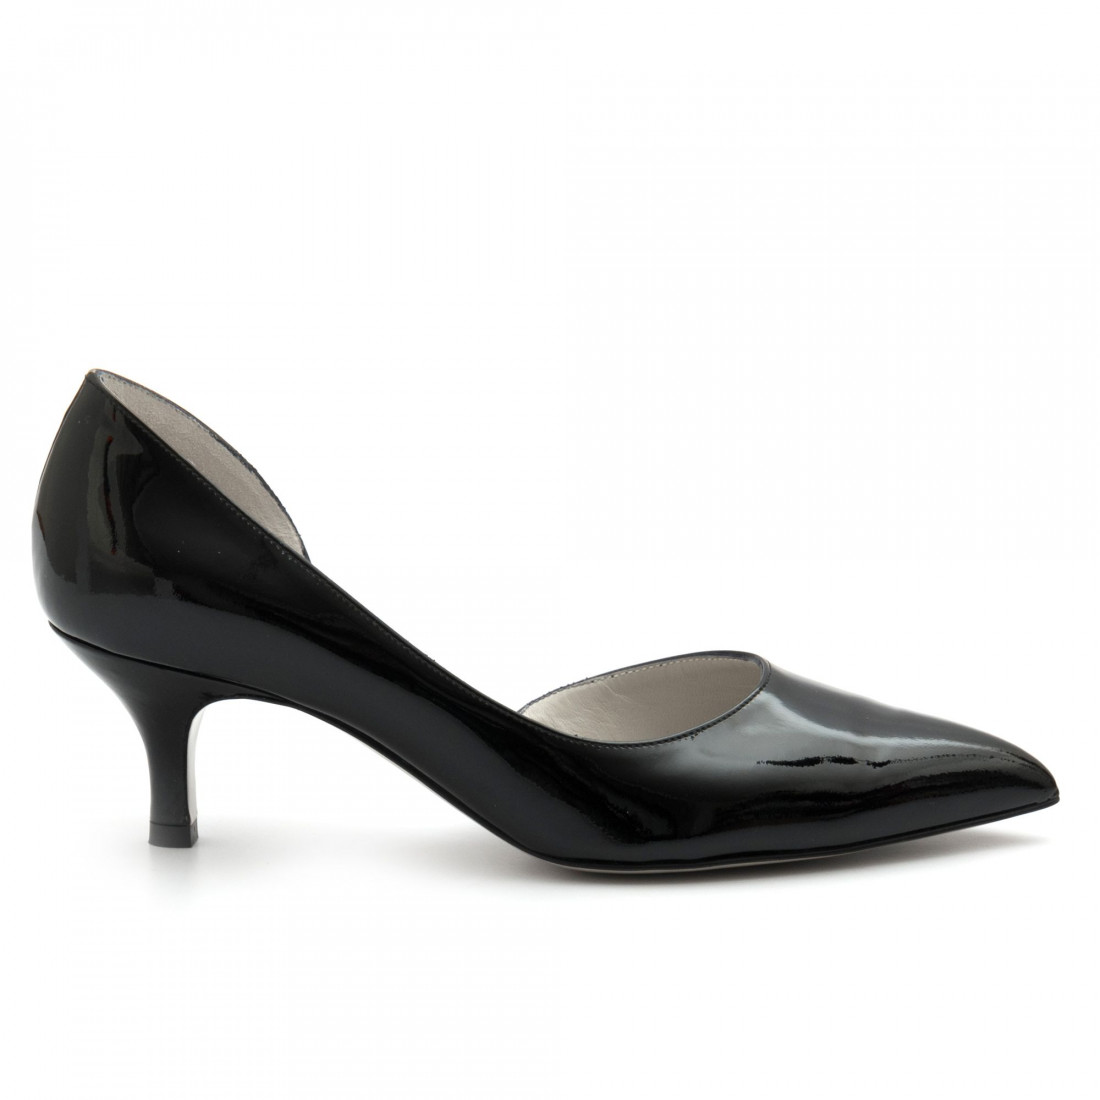 Low heel White D pump in black patent leather